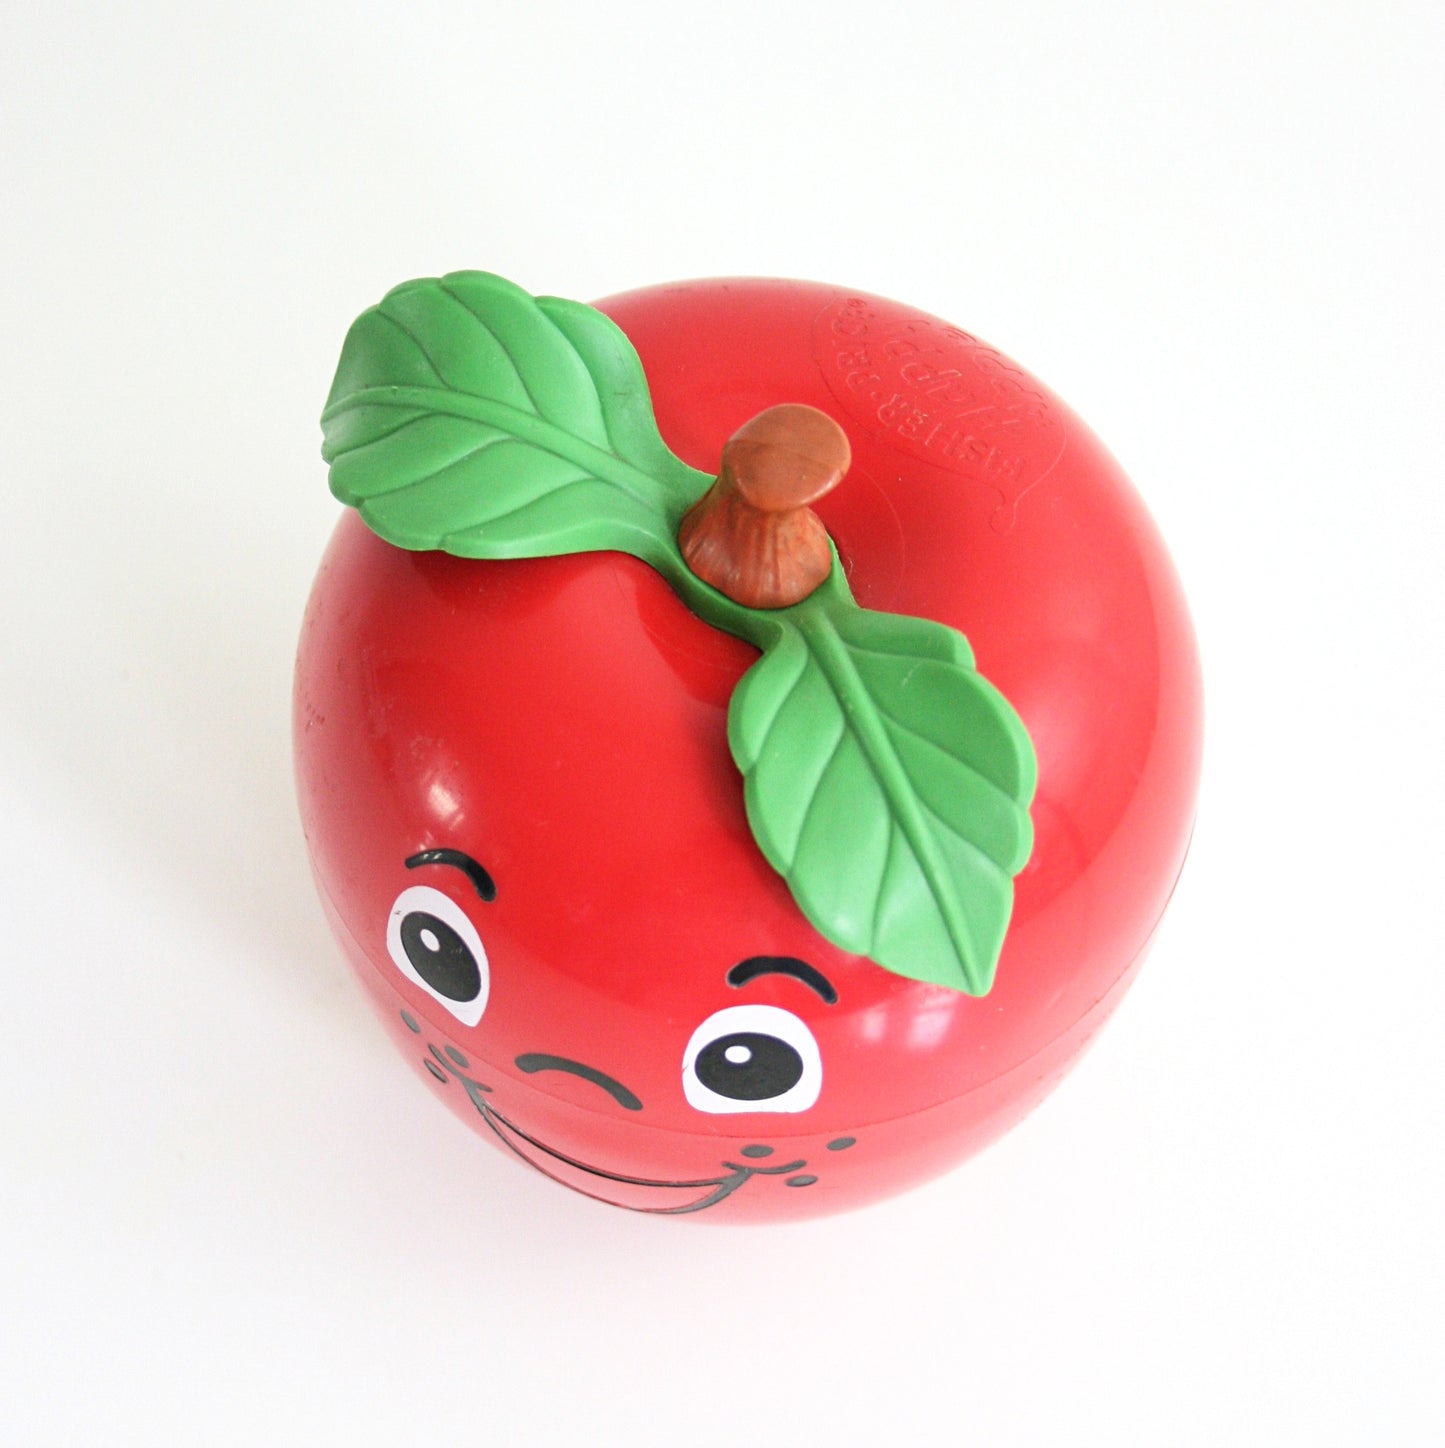 SOLD - Vintage 1972 Fisher-Price Happy Apple Chime Toy